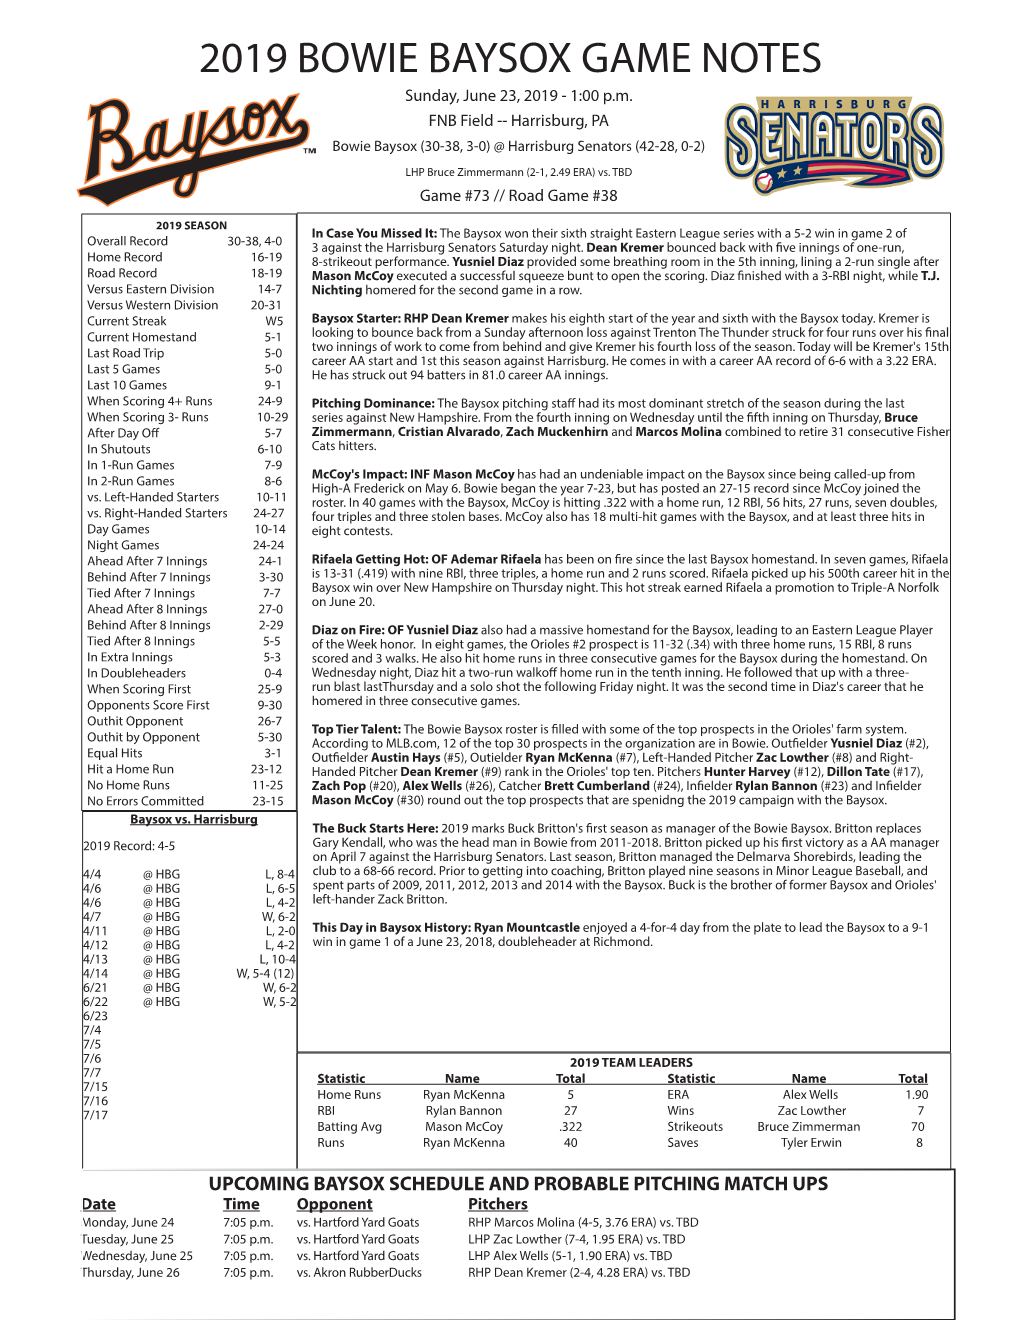 2019 BOWIE BAYSOX GAME NOTES Sunday, June 23, 2019 - 1:00 P.M